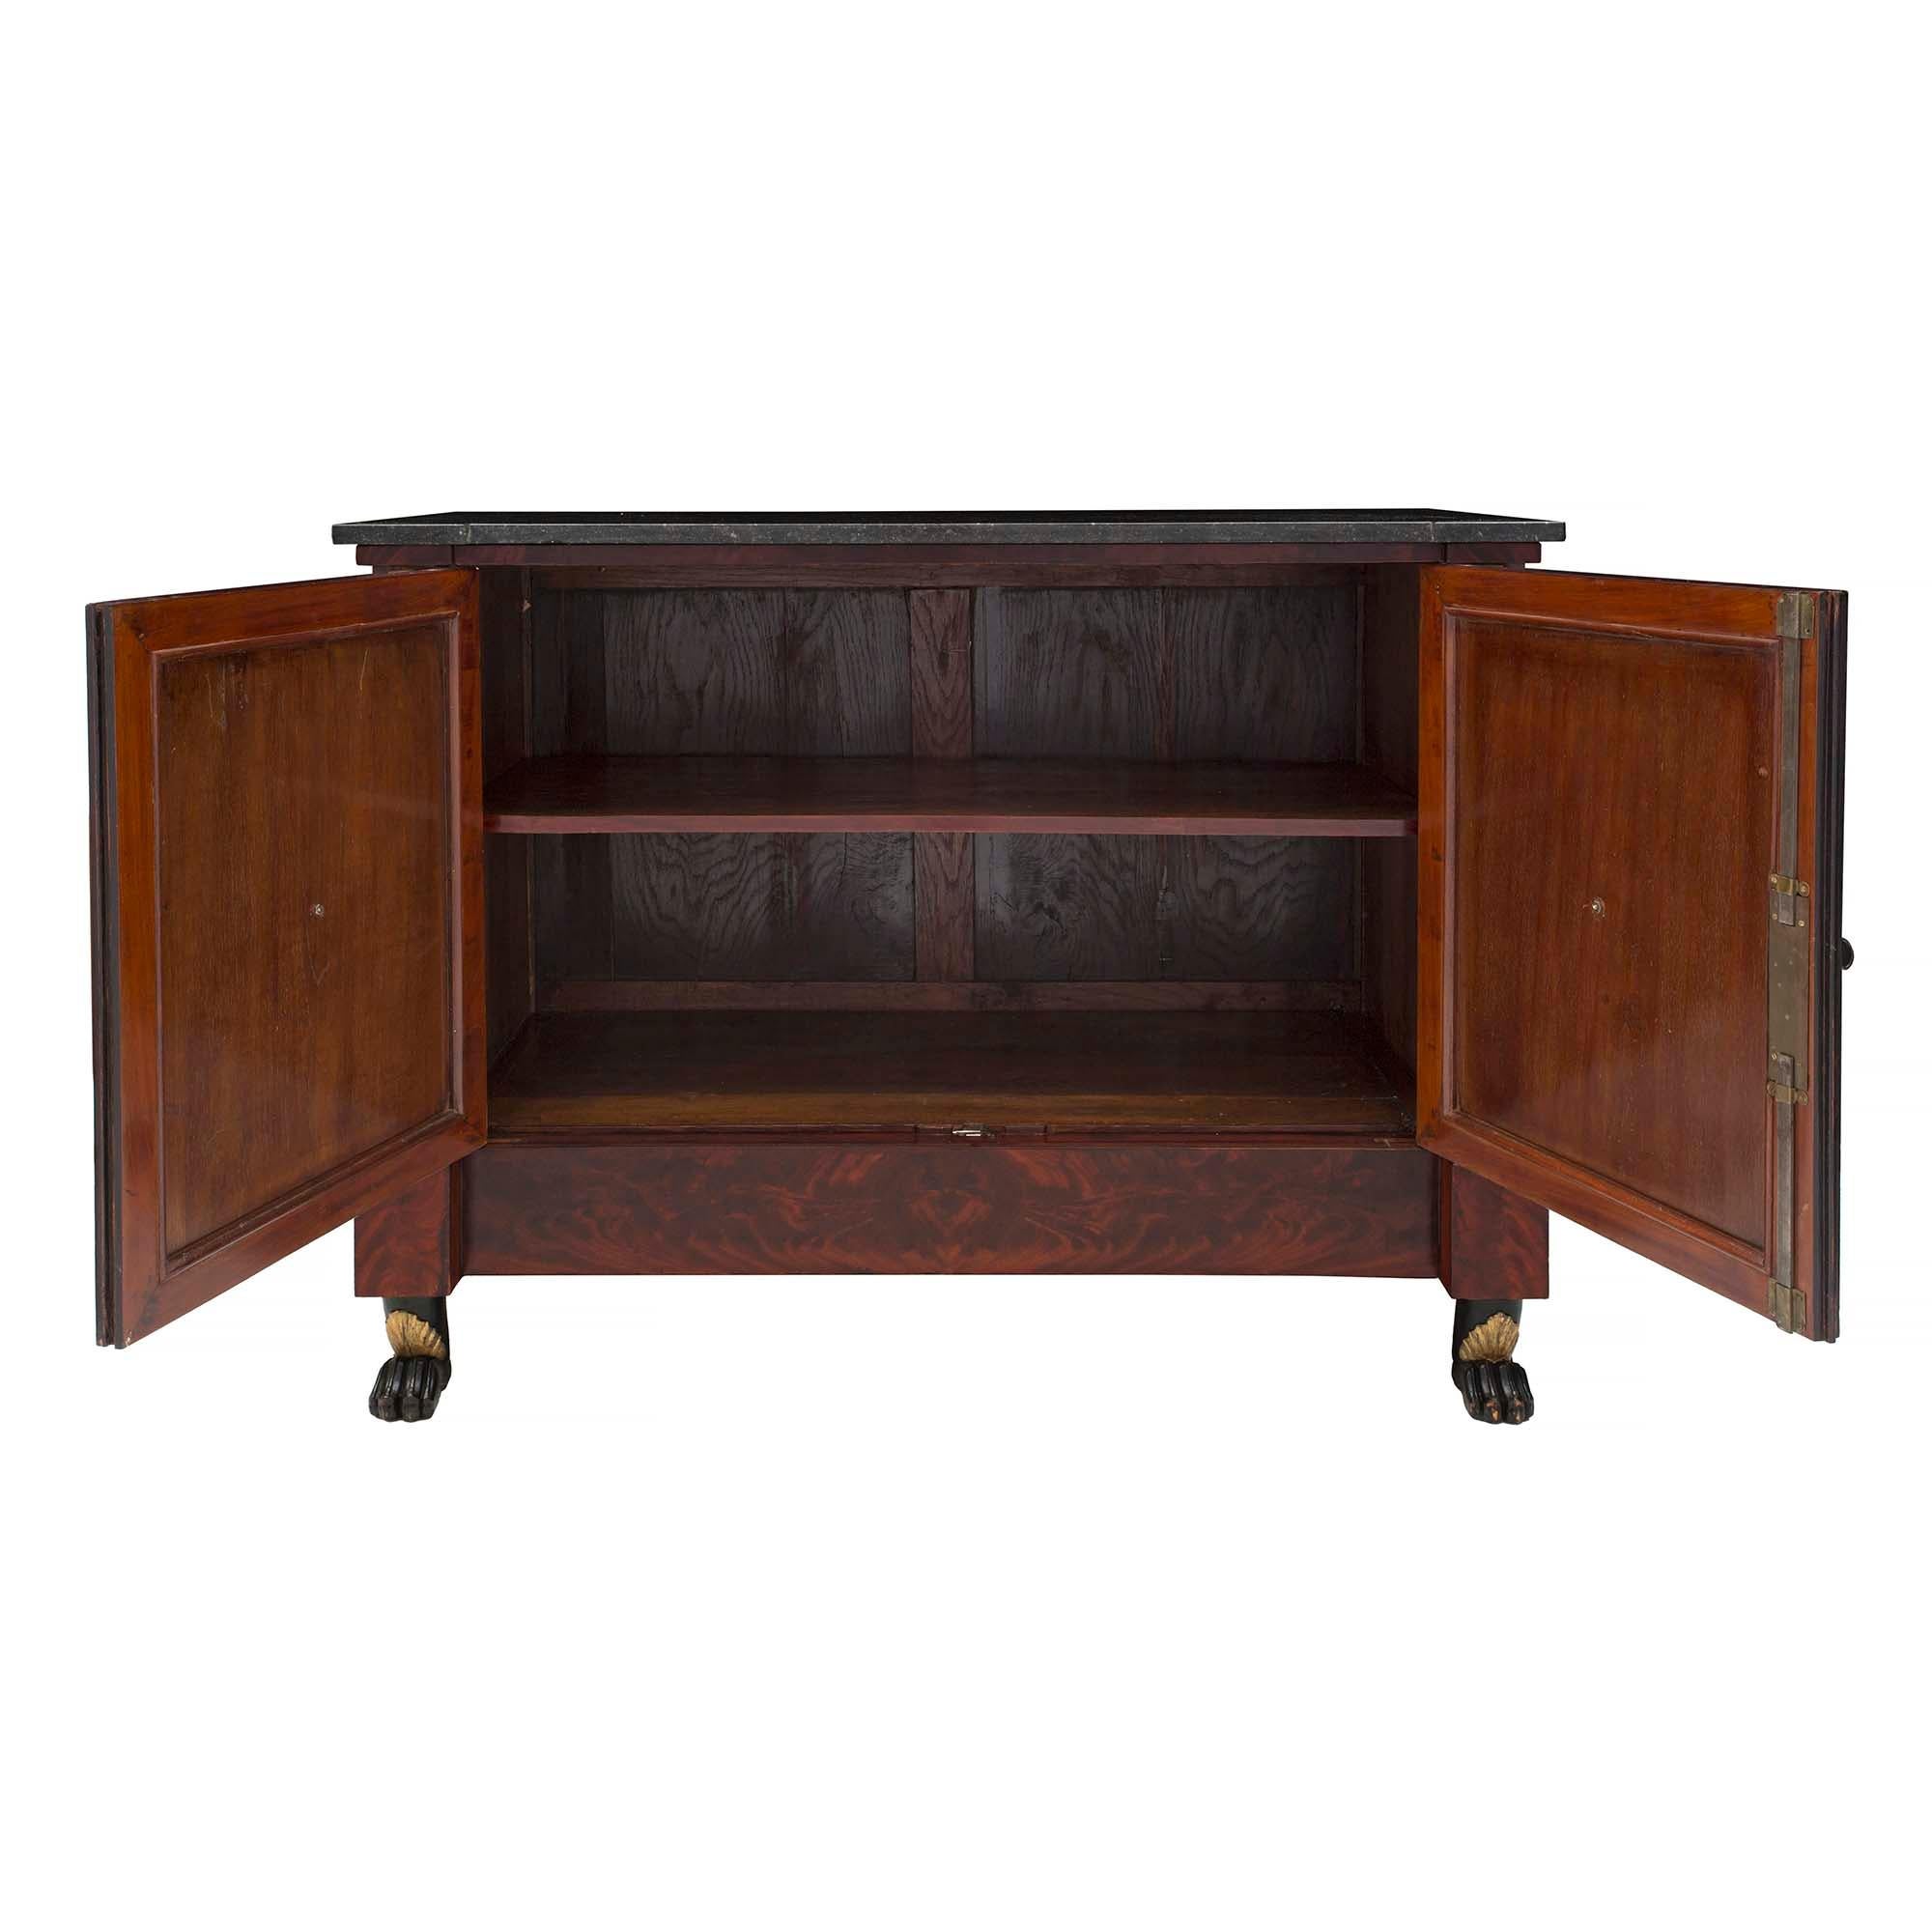 French 19th Century Empire Period Flamed Mahogany, Patinated and Ormolu Cabinet In Good Condition For Sale In West Palm Beach, FL